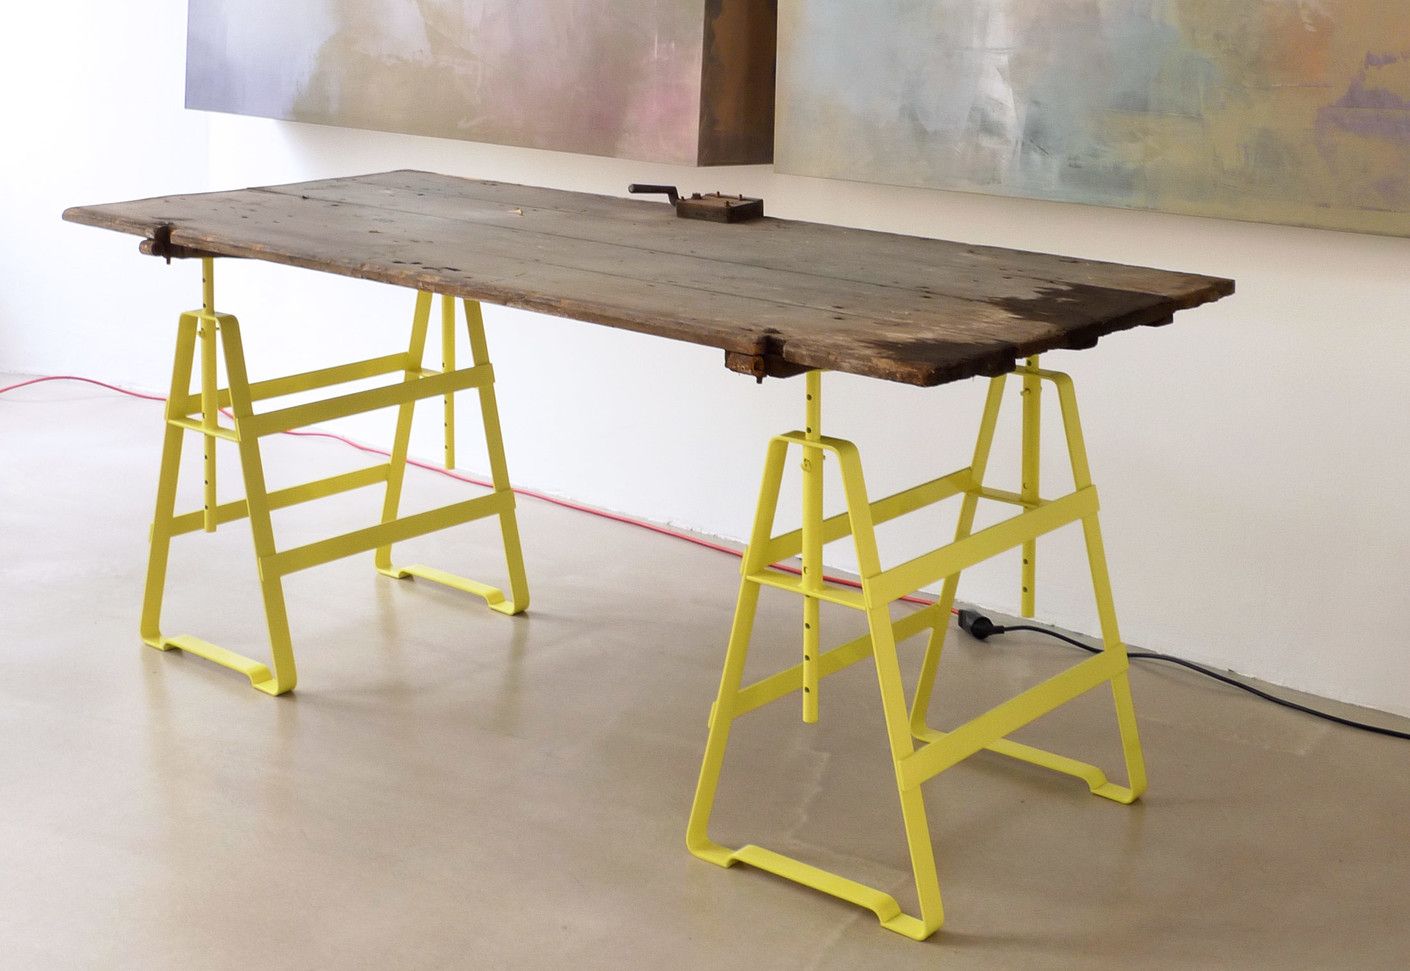 History and Evolution of the Trestle
Table